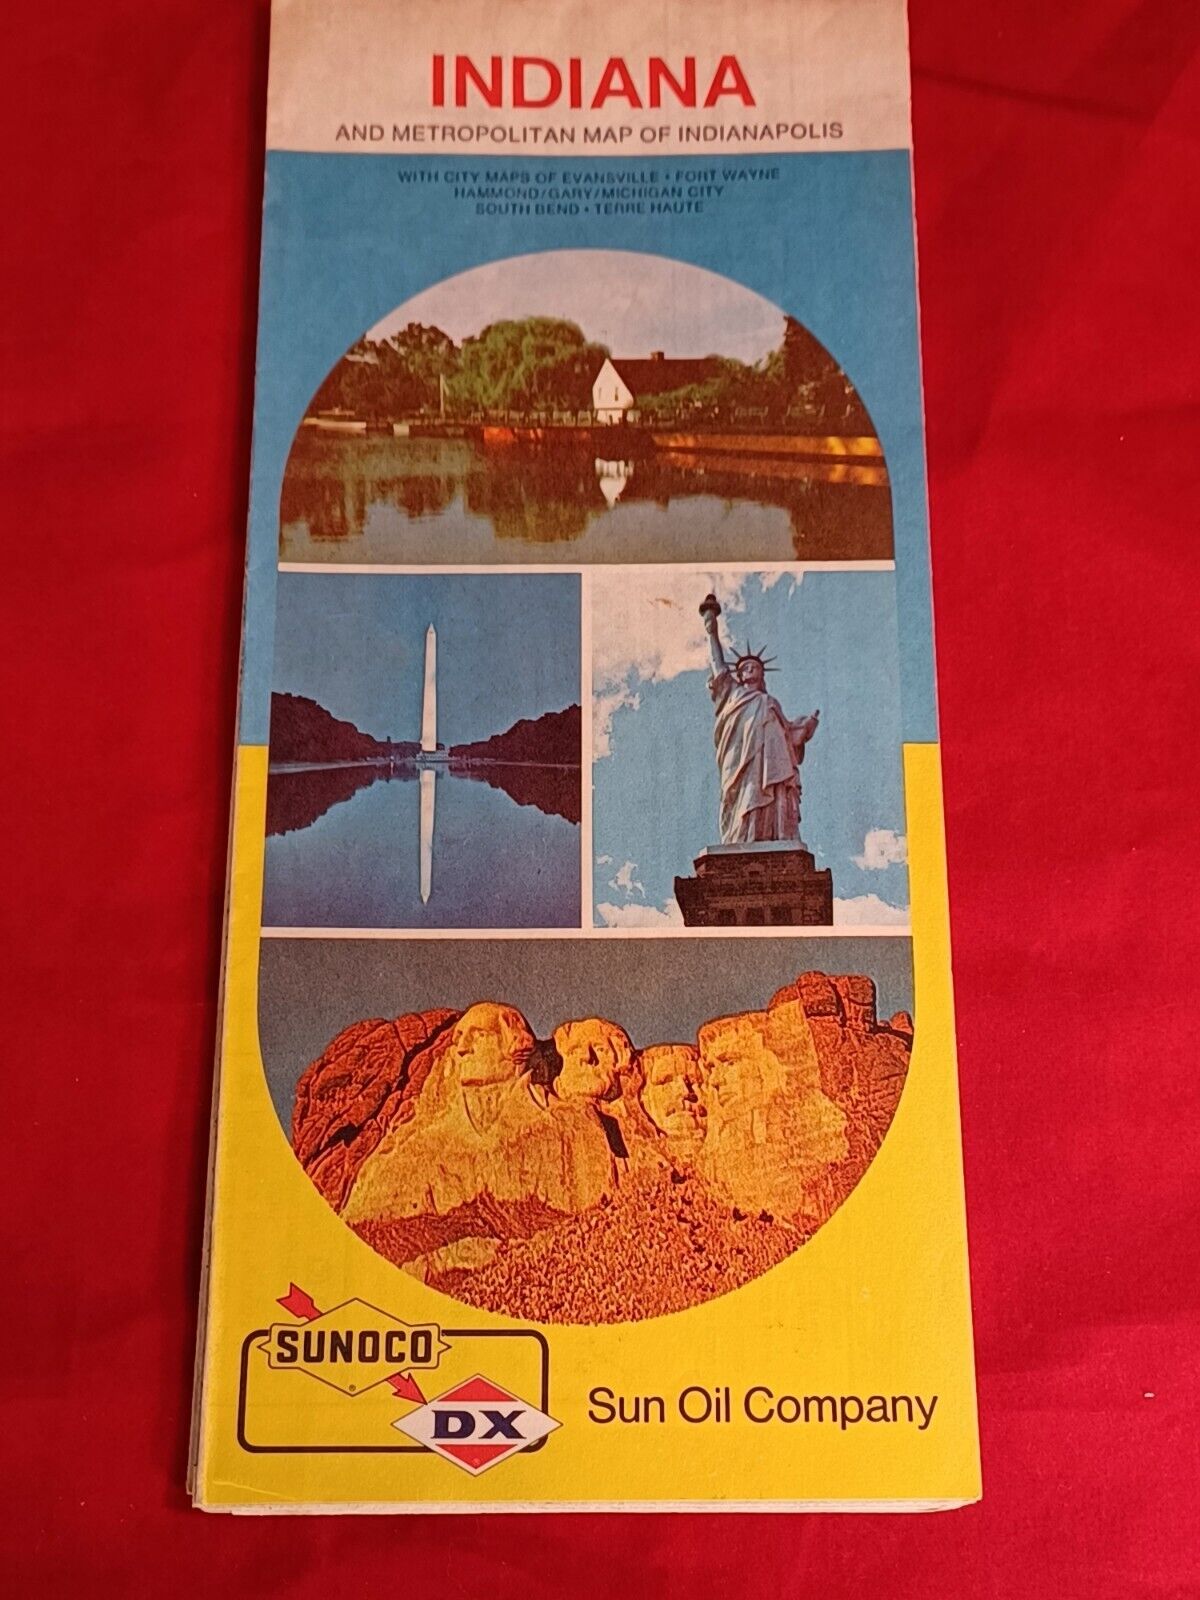 Vintage 1976 Sunoco/DX Indiana Oil Gas Service Station Travel Road Map